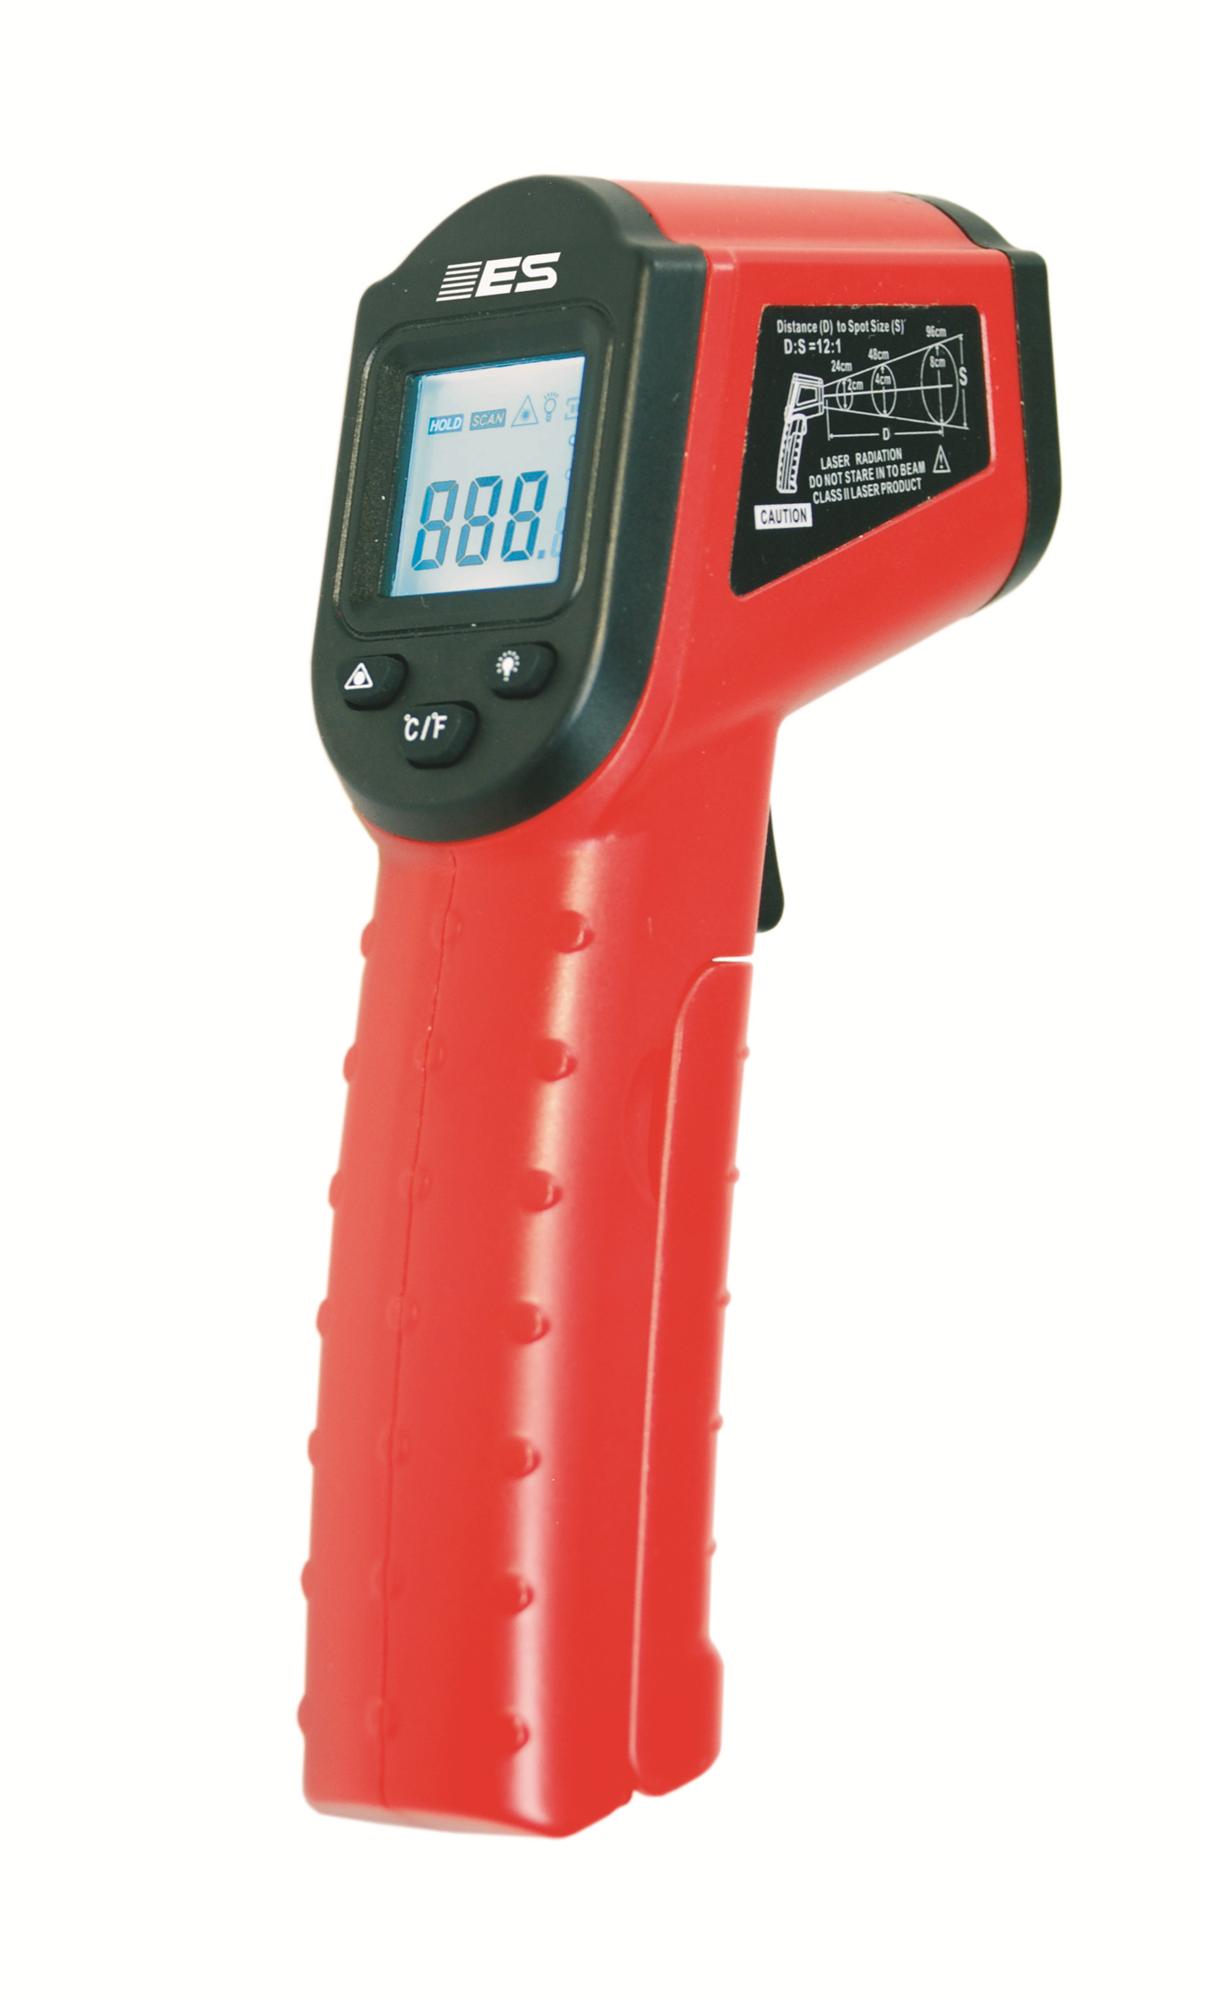 EST-45 Infrared Thermometer